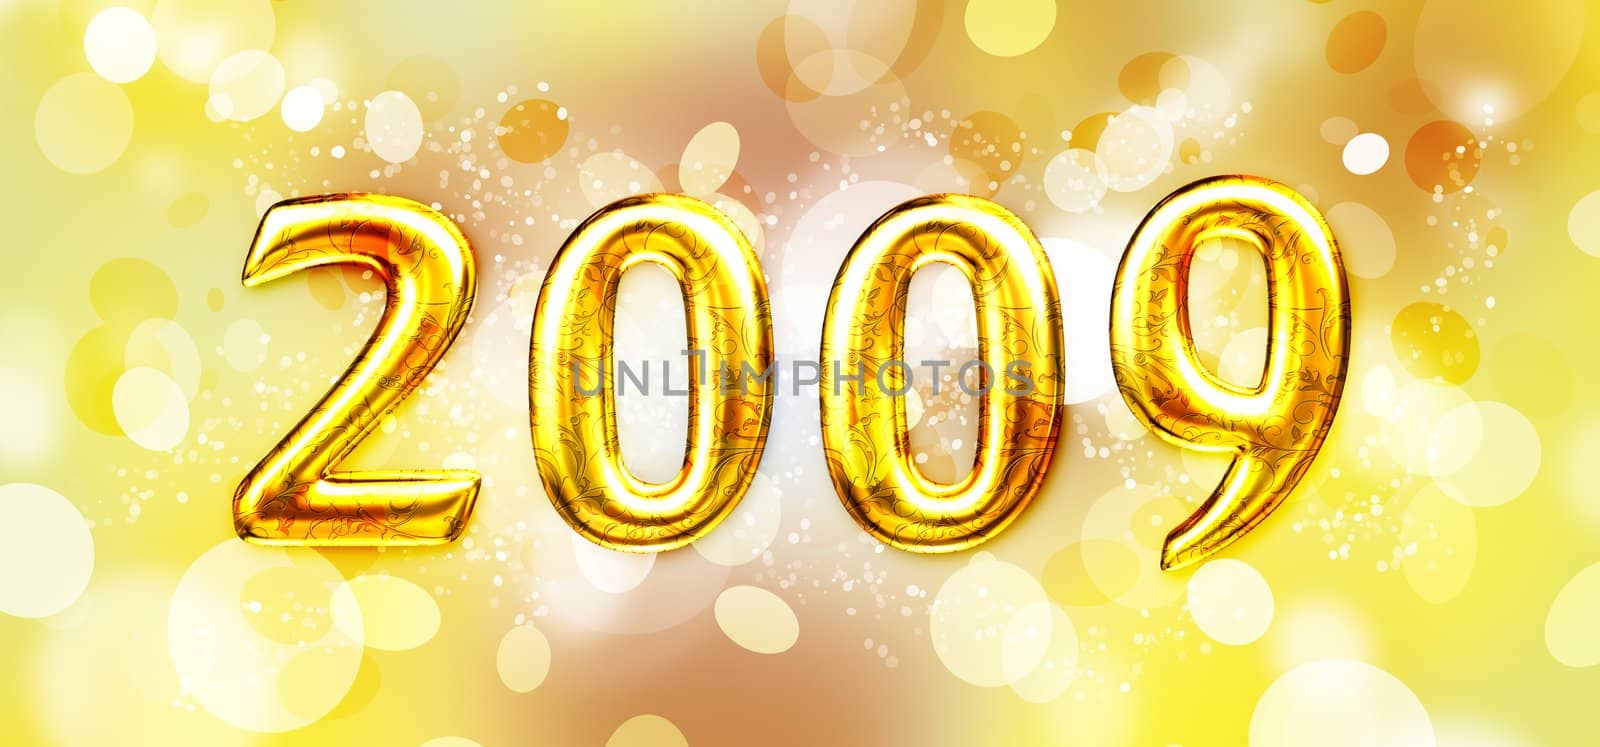 "2009" on colorful background